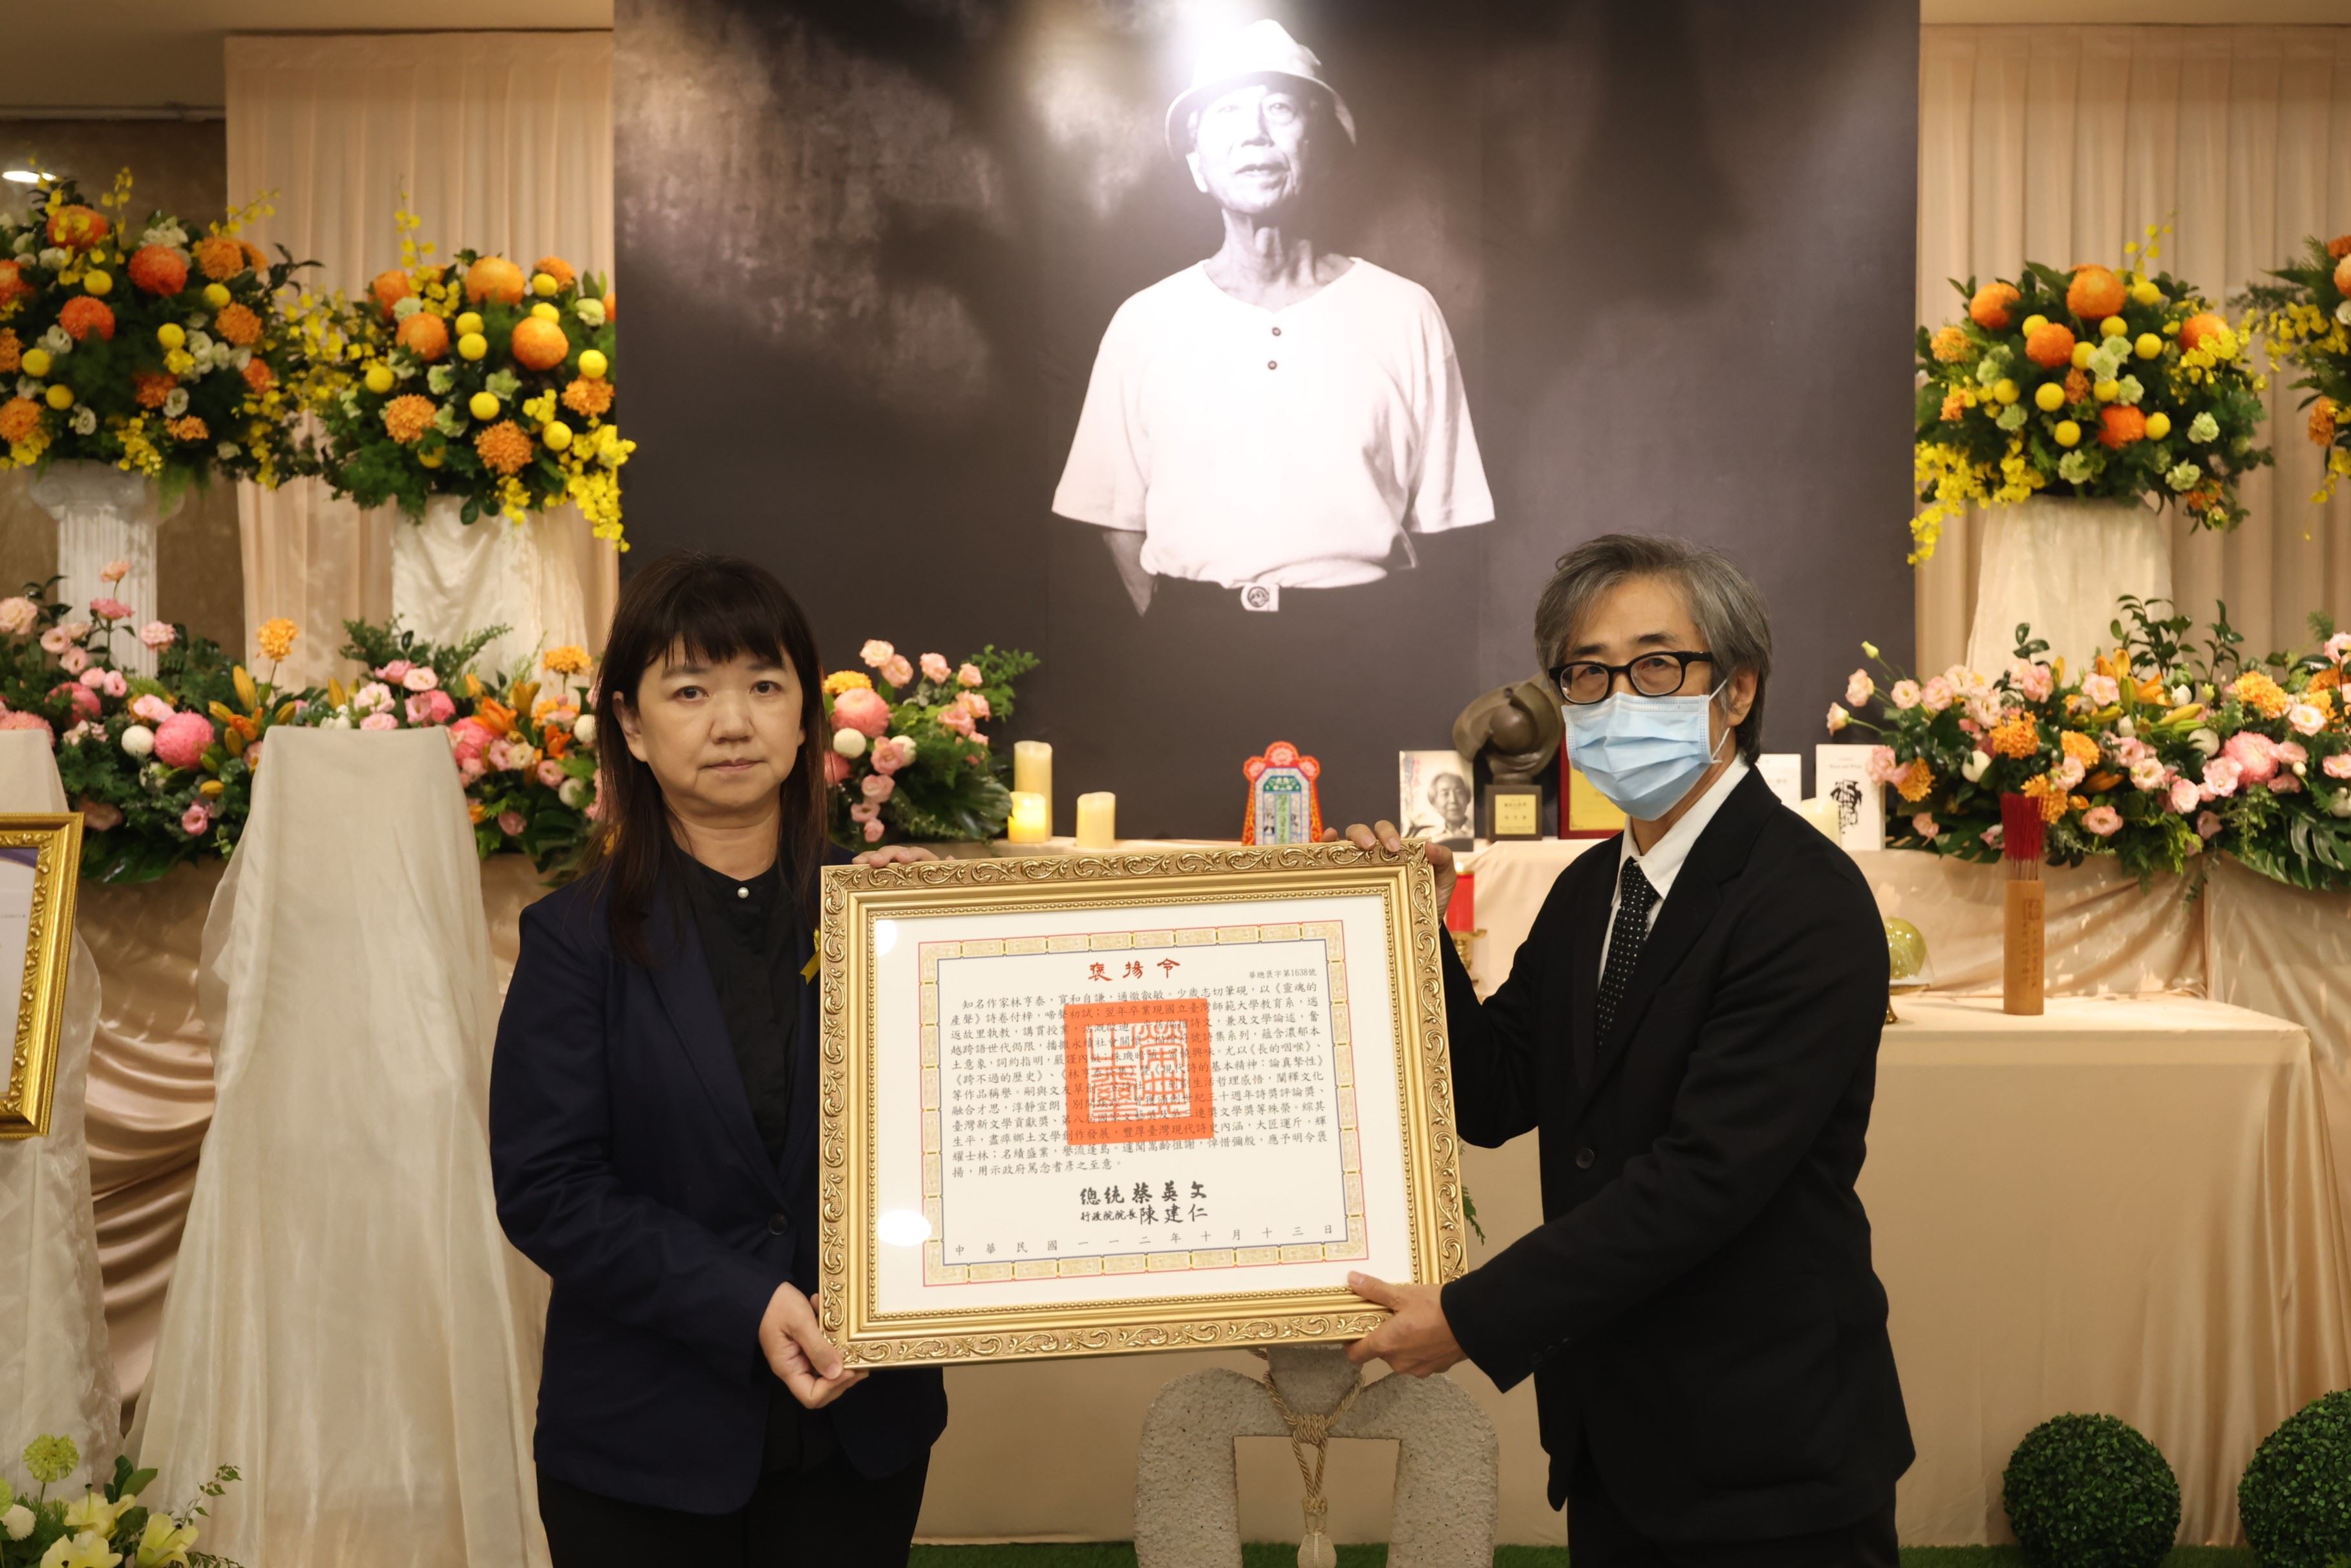 Deputy Minister of Culture Lee Ching-hwi attended the memorial service and presented the presidential citation to Lin’s son Lin Yu-pin.